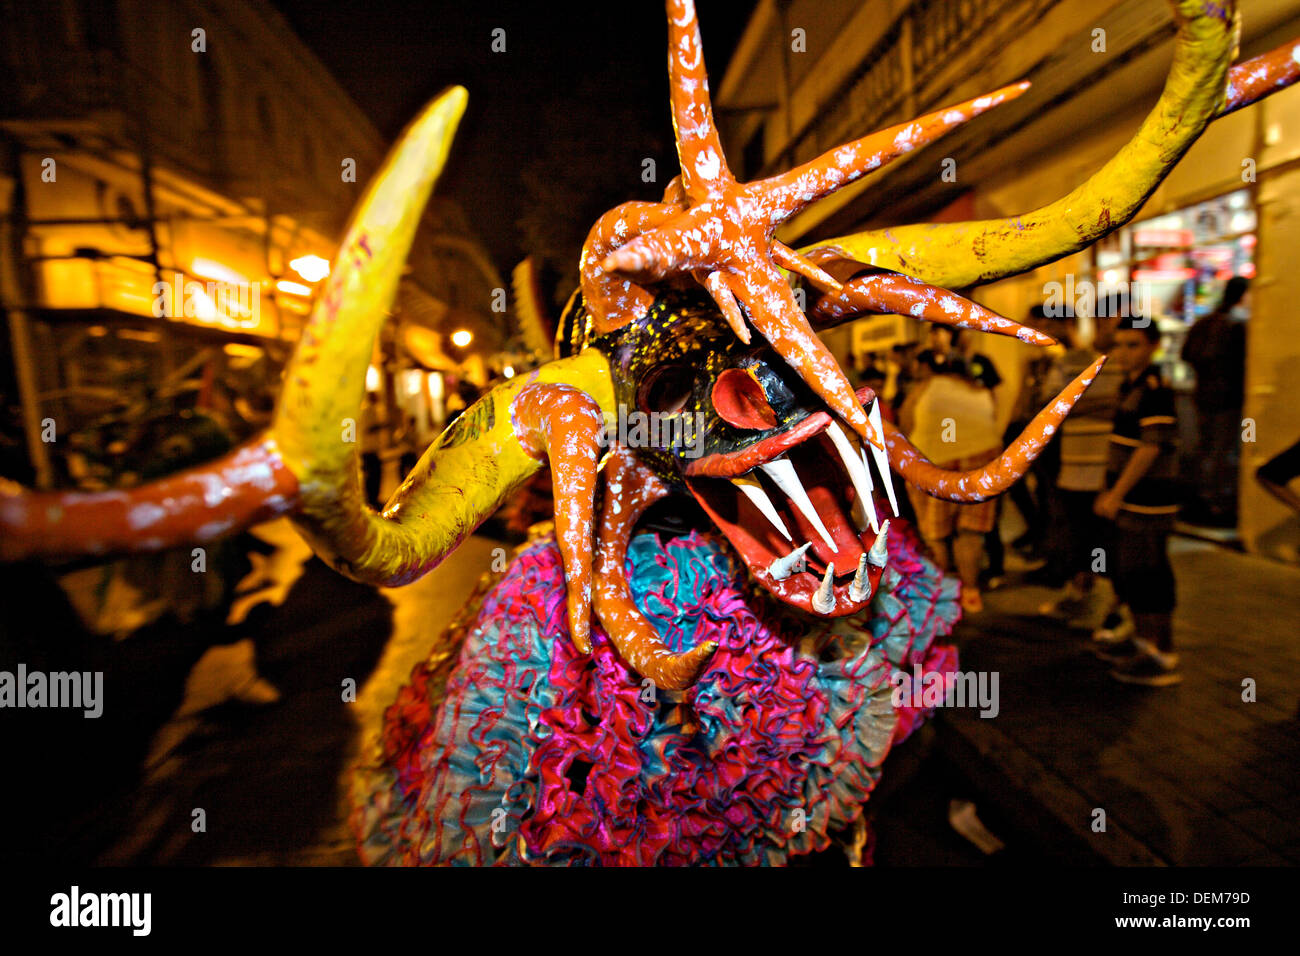 A costumed reveler called vejigante dances in the streets during the Carnaval de Ponce February 21, 2009 in Ponce, Puerto Rico. Vejigantes are a folkloric character representing the devil. Stock Photo